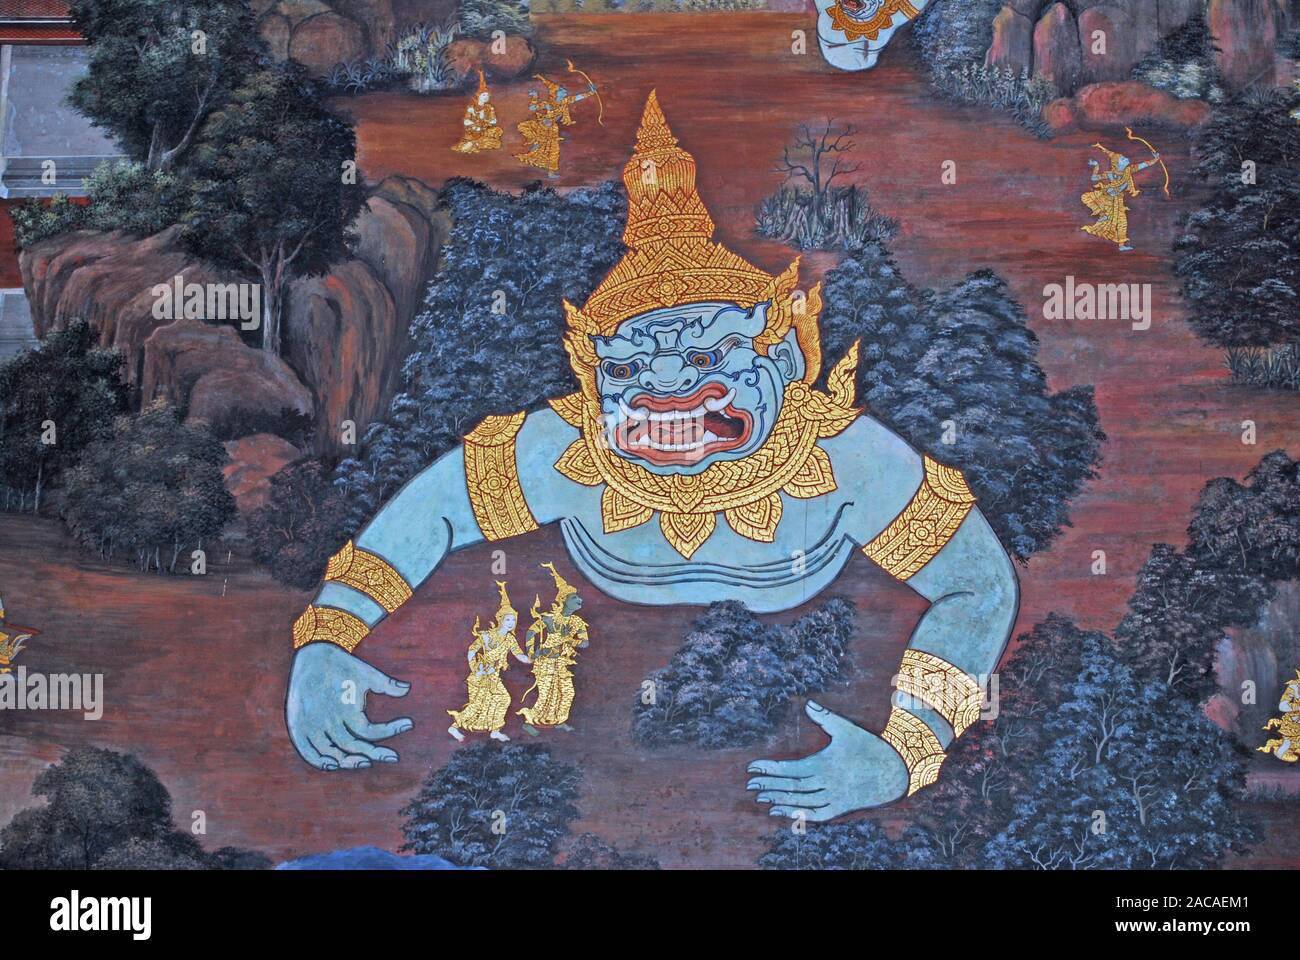 Restored wall paintings (Ramakia) in the Great Palace in Bangkok Stock Photo